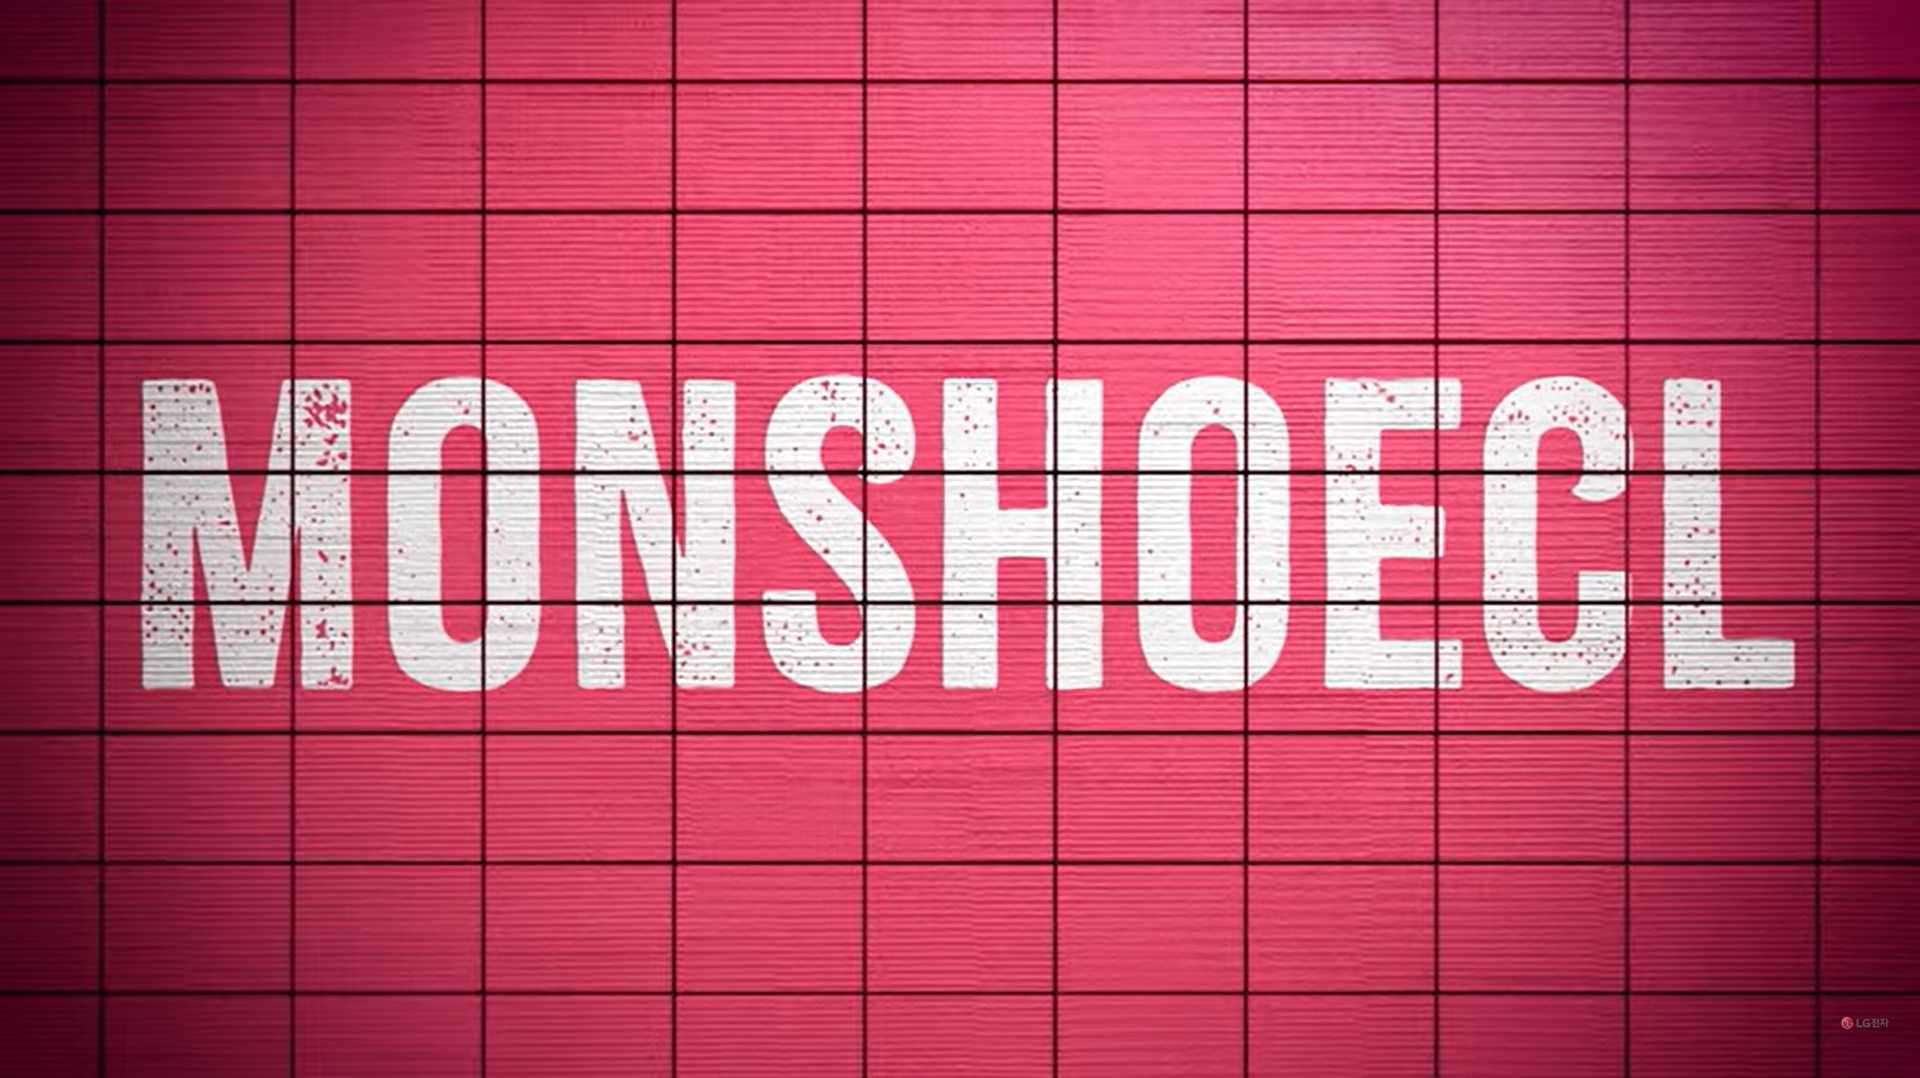 A digital image of Monshoecl spelled out on a red tile wall